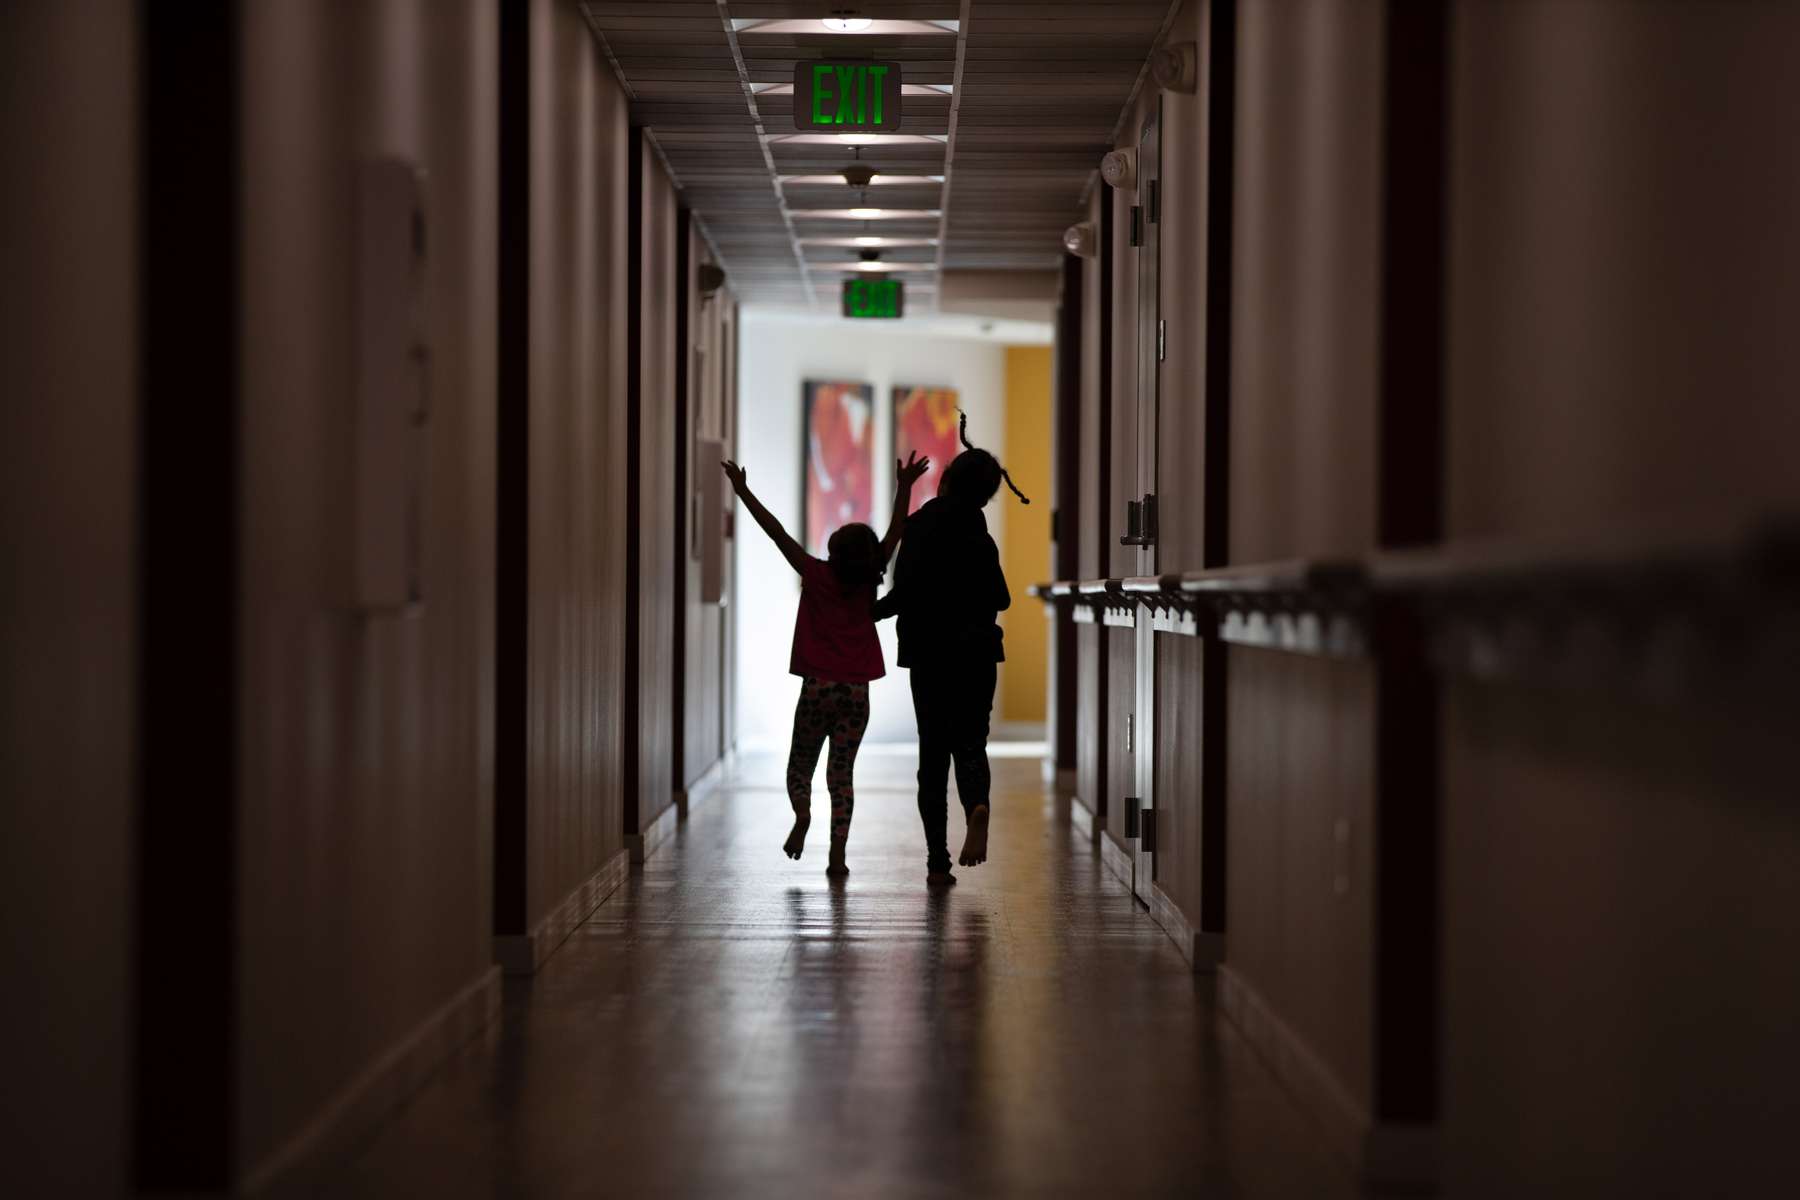 Sabrina, age 4, and Smira Sanura, age 6, run through the hallway of the Mercy House as their family remains in quarantine to help curb the spread of Covid-19 in Seattle, Wash. on October 21, 2020. They live with three other siblings including a newborn, two parents who work, and their grandmother in their apartment. One of the girls says the hardest thing about online learning is you have to mute and unmute yourself. She says this year has been difficult because sometimes other kids are allowed outside to play but their mother won’t let them. ICHS has a partnership with the Mercy House to pilot onsite health and wellness classes and events there. The girl’s mother, Amina Osman who works as a nurse says, “The biggest challenge is the fact that you have to be a mom and be a teacher at the same time. You have to multitask. Make sure food is at home and everything. So it's, it's been a tough taking care of a newborn and managing the kids as well.{quote} (photo by Karen Ducey)